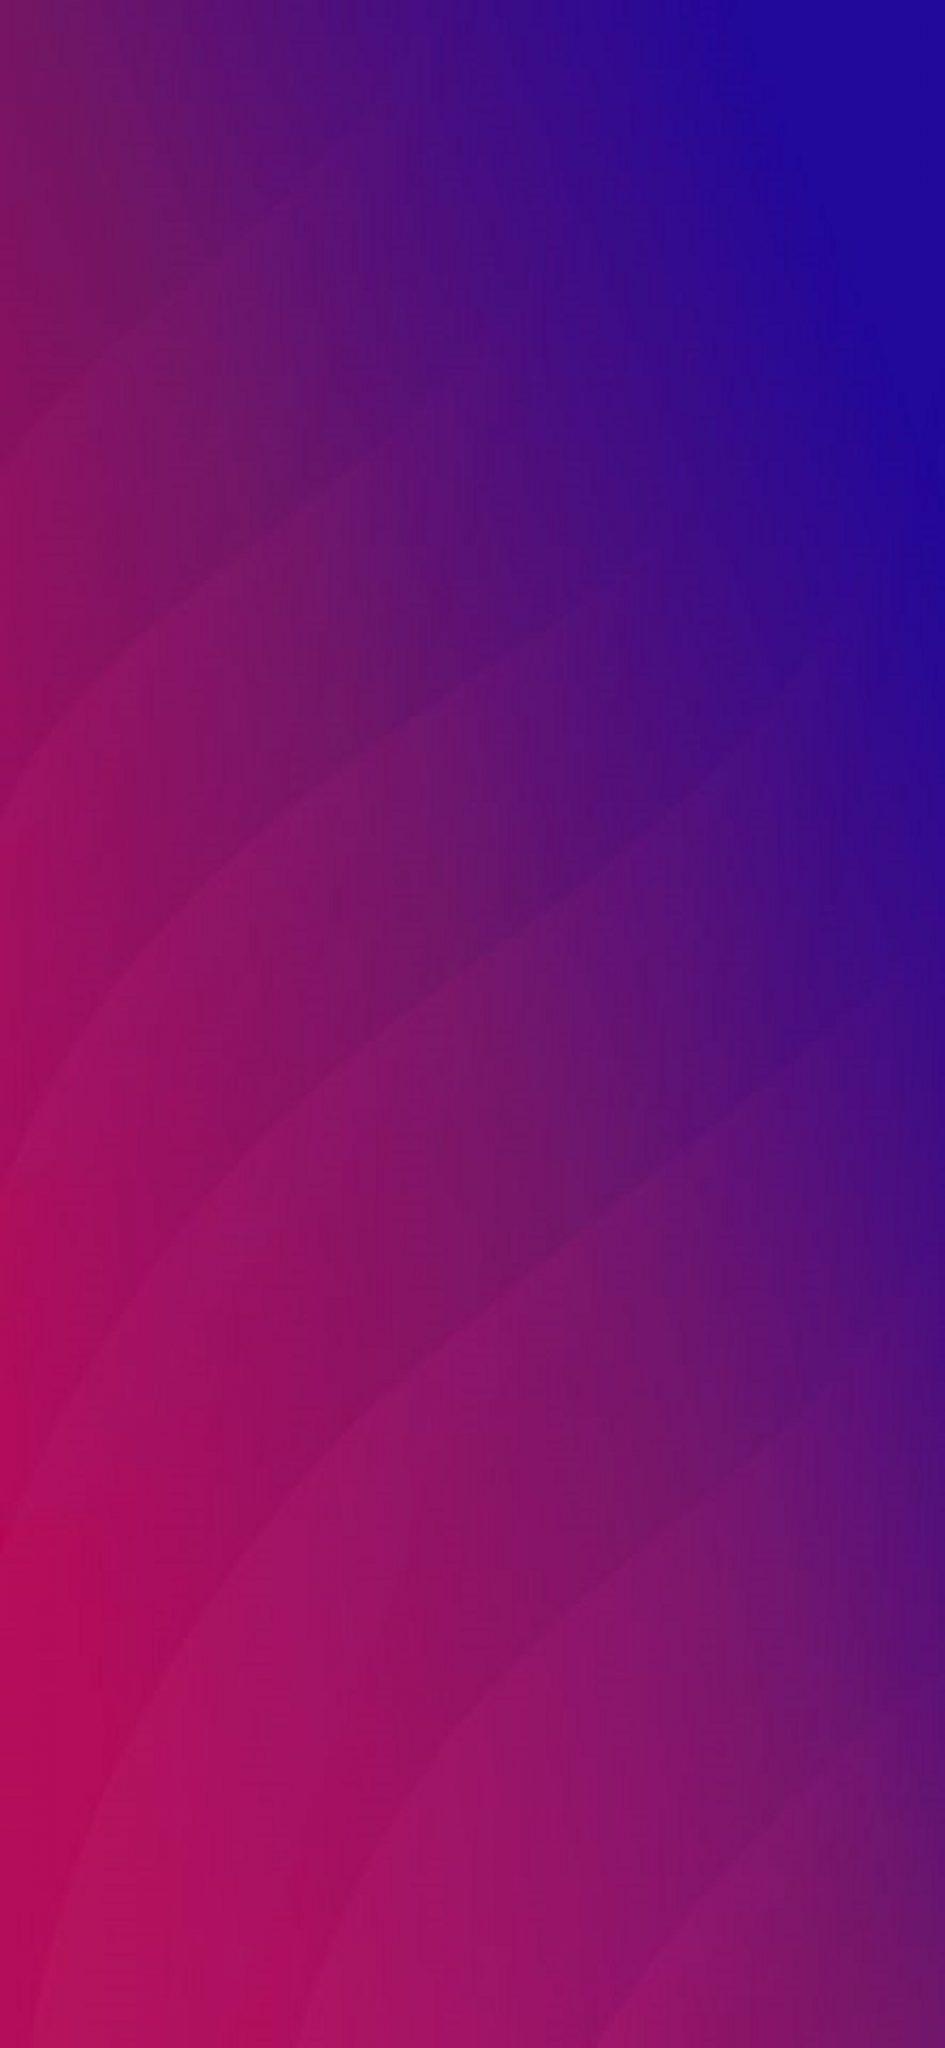 Download Oppo Find X Stock Wallpaper File Included